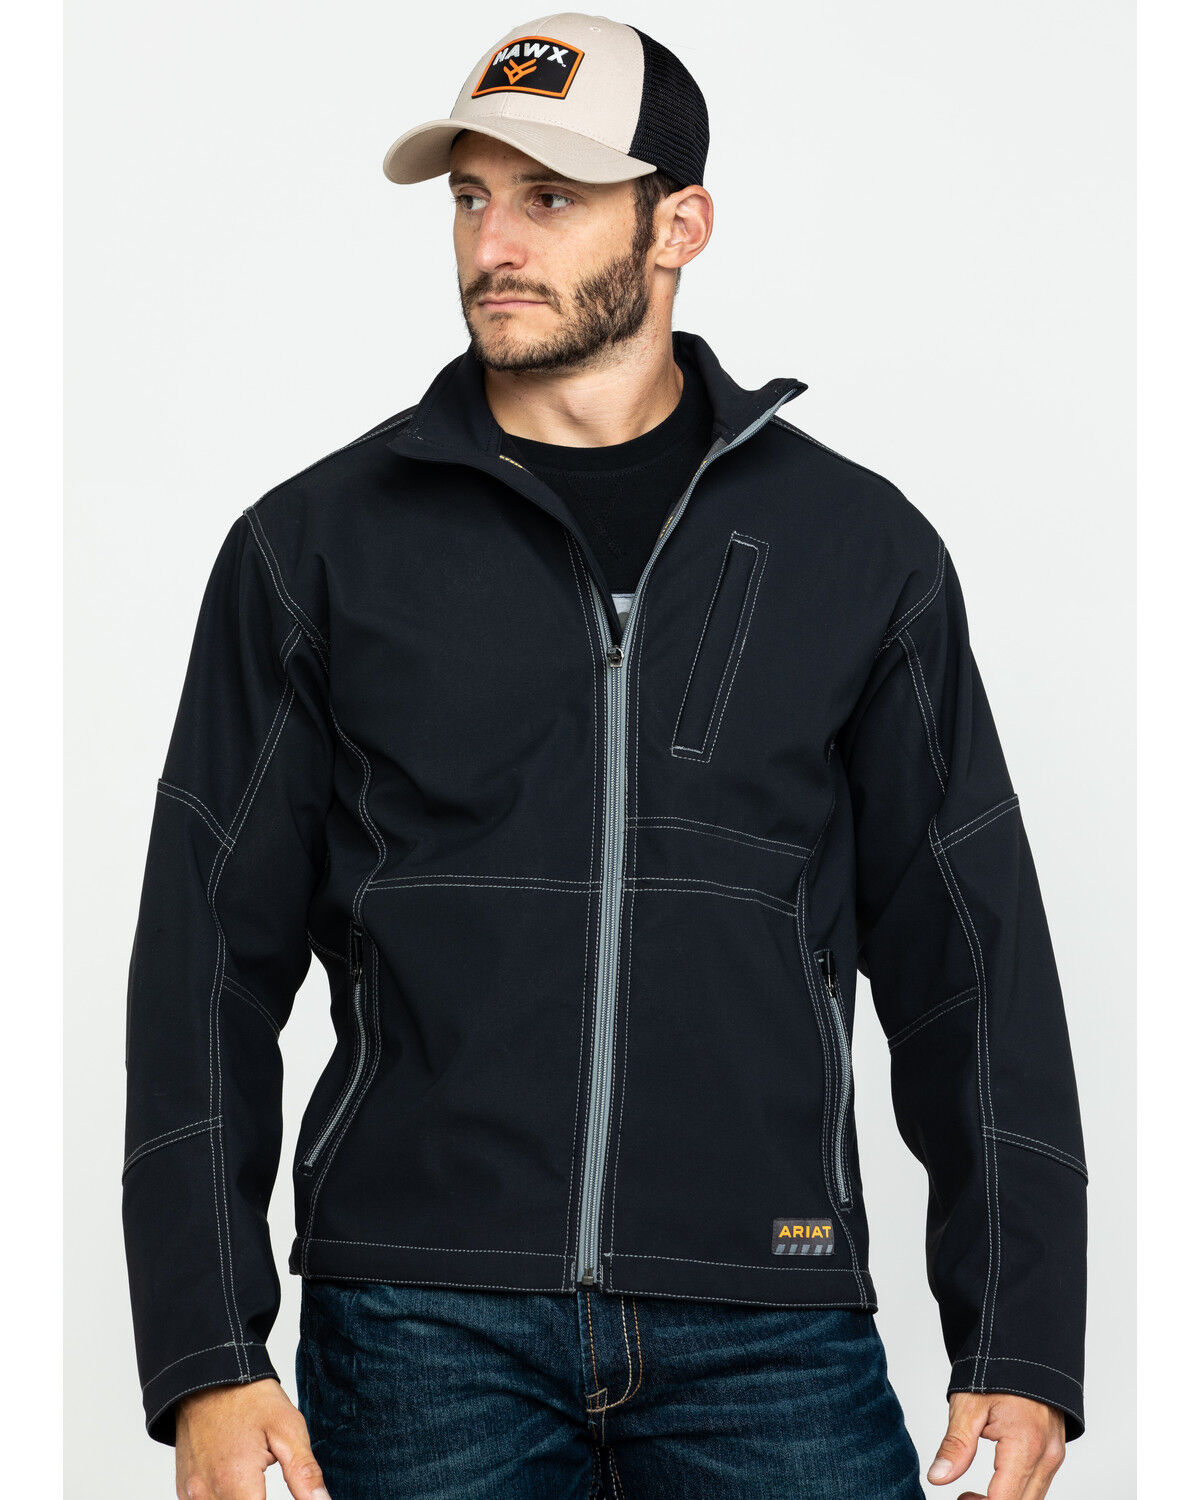 Black Details about   Ariat Men's Big and Tall Canvas Softshell Jacket  Small 